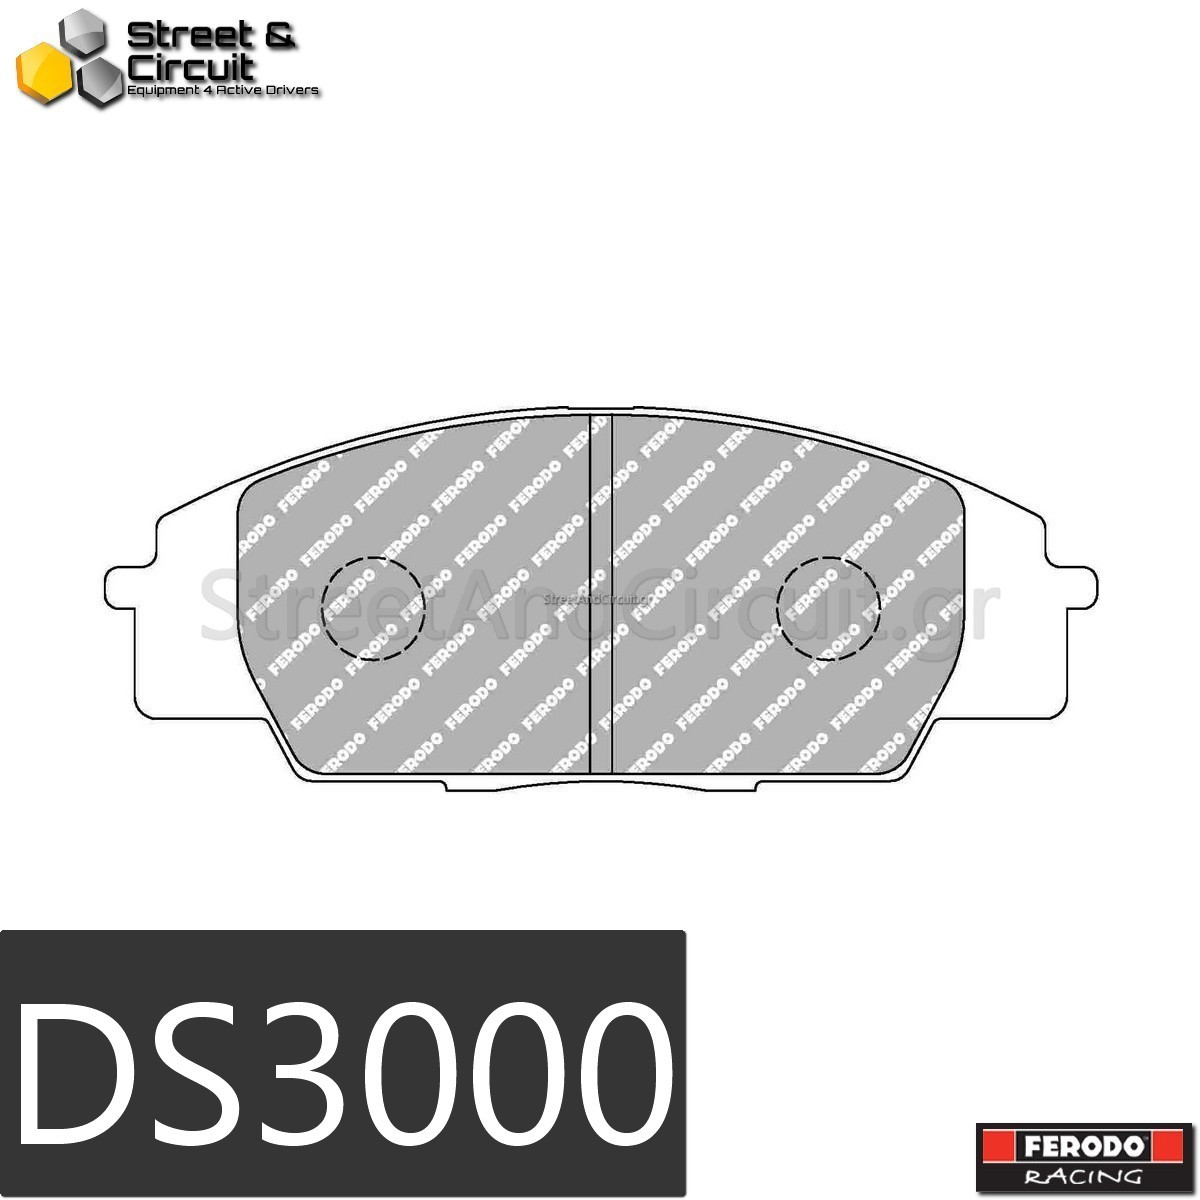 2.0 16V S2000 1999-2009 (FRONT), Brake System: SUMITOMO - Ferodo Racing Τακάκια *DS3000*